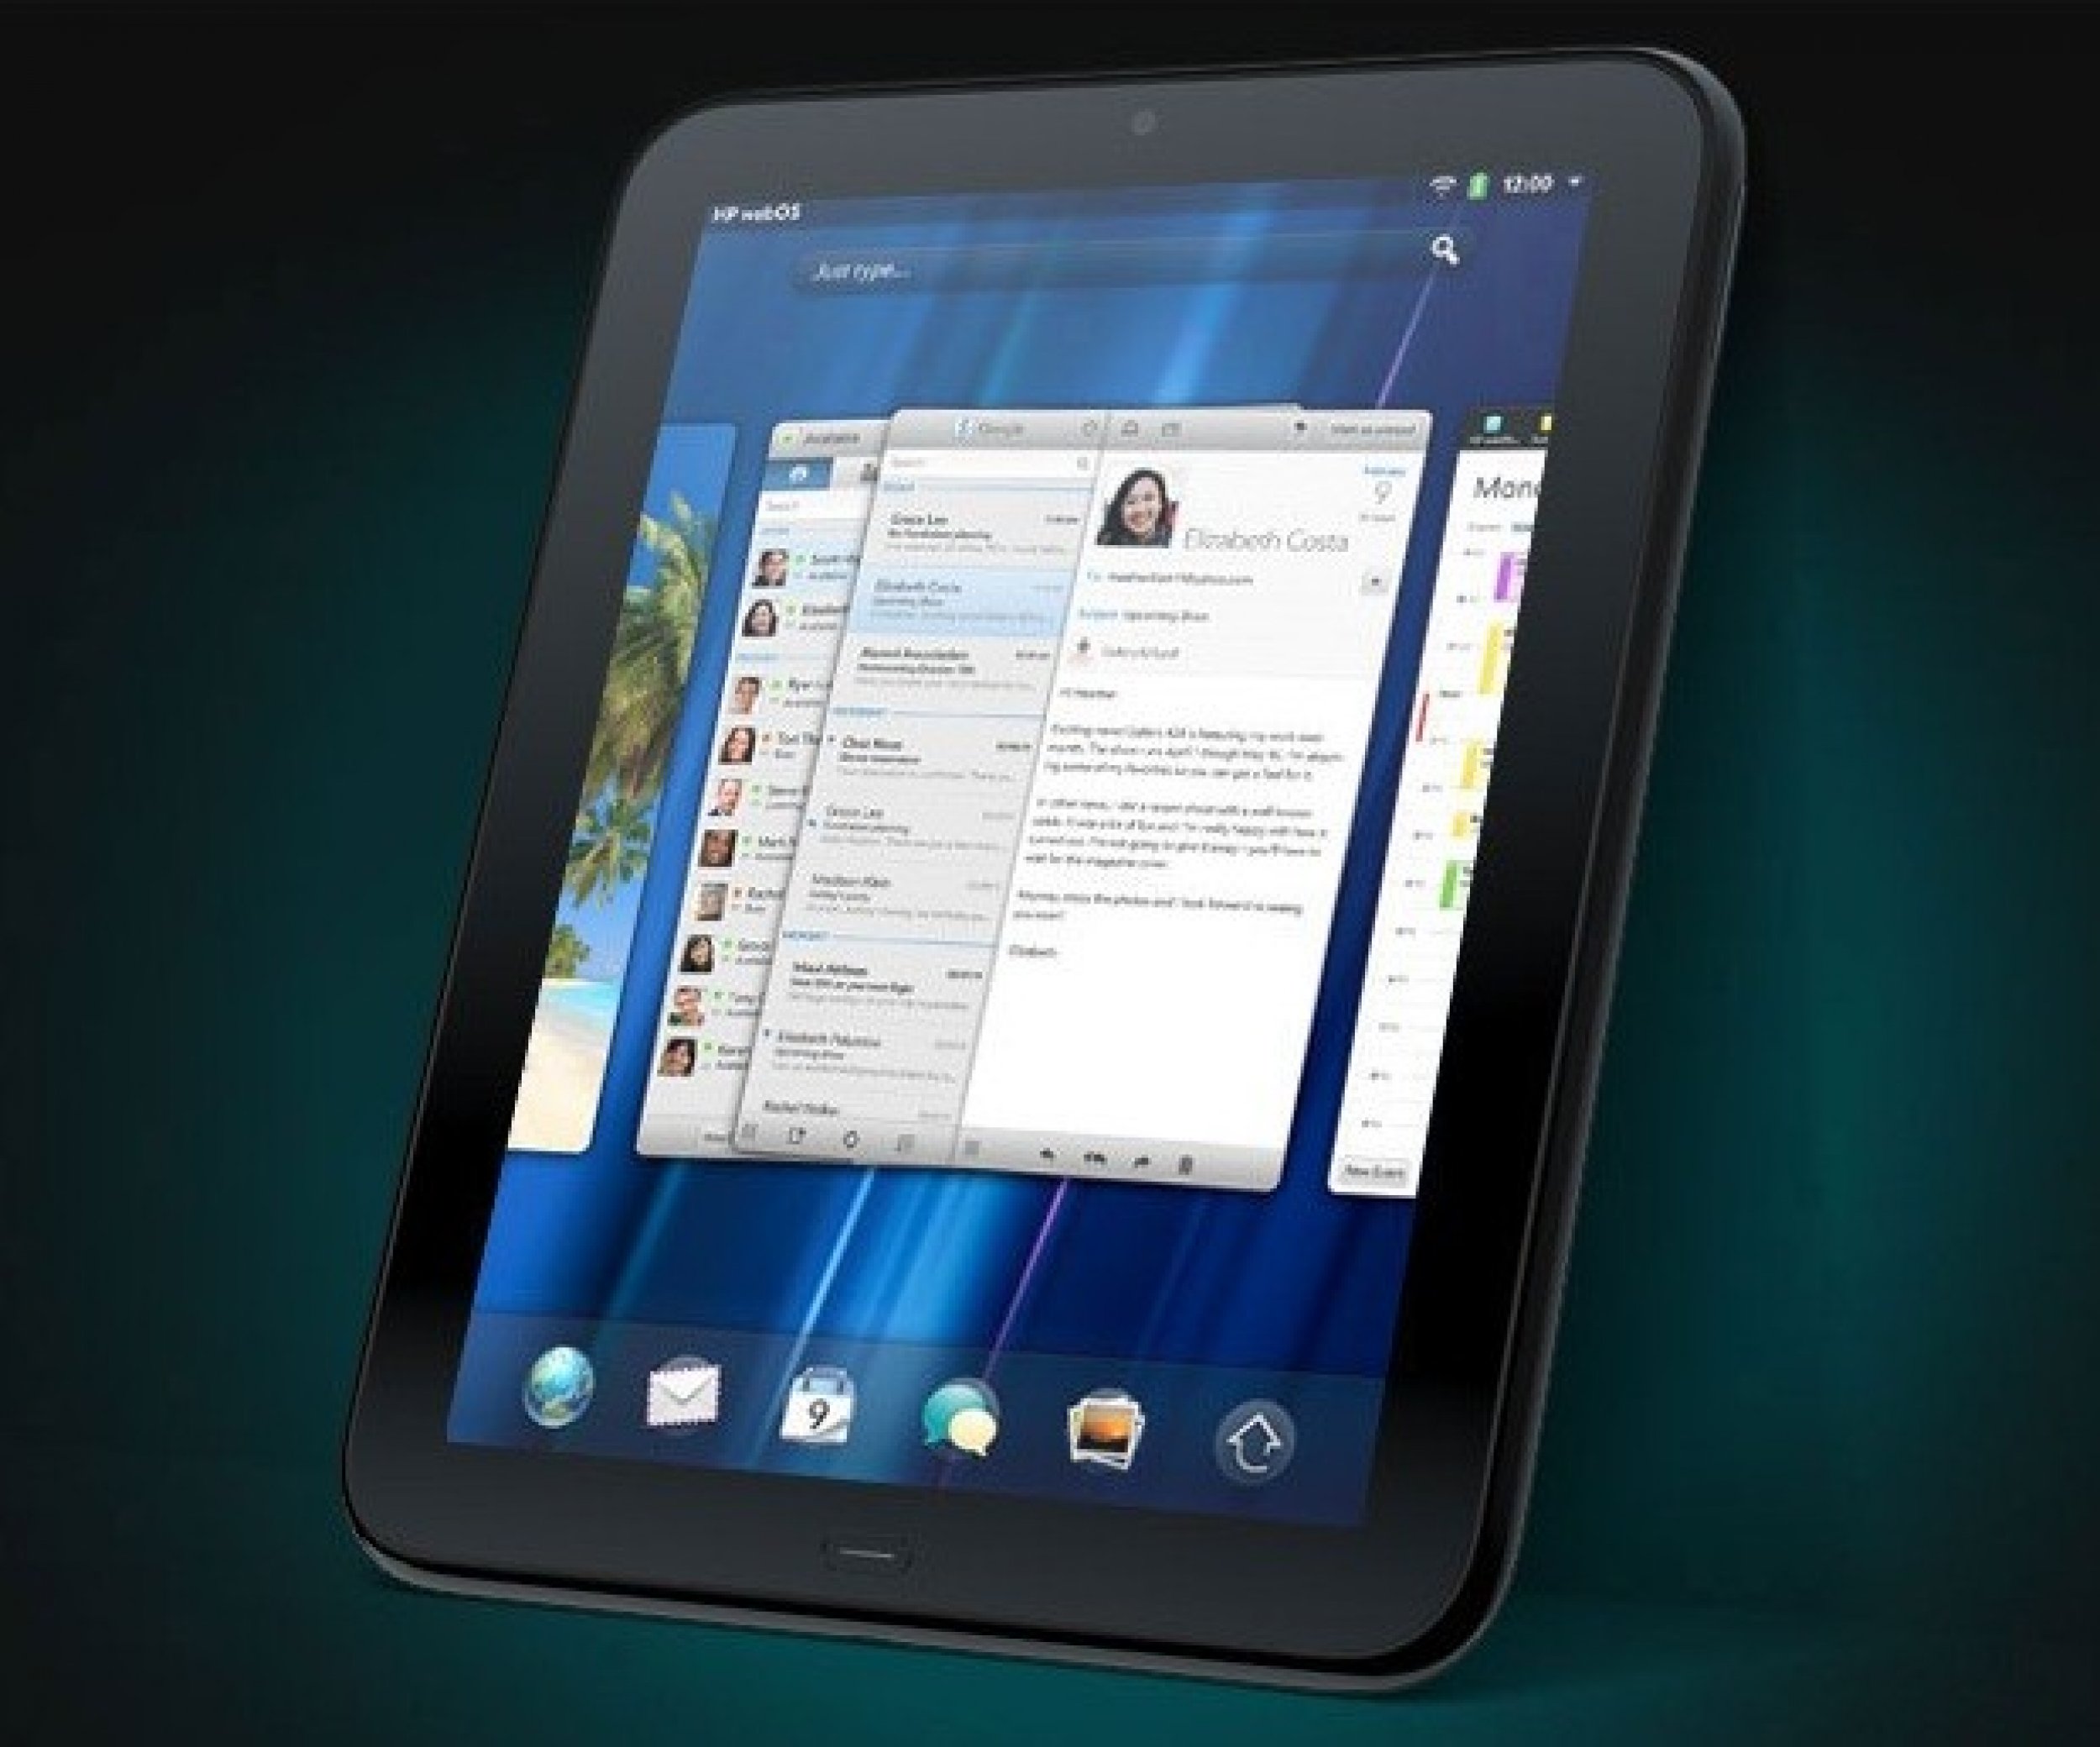 HPs TouchPad tablet